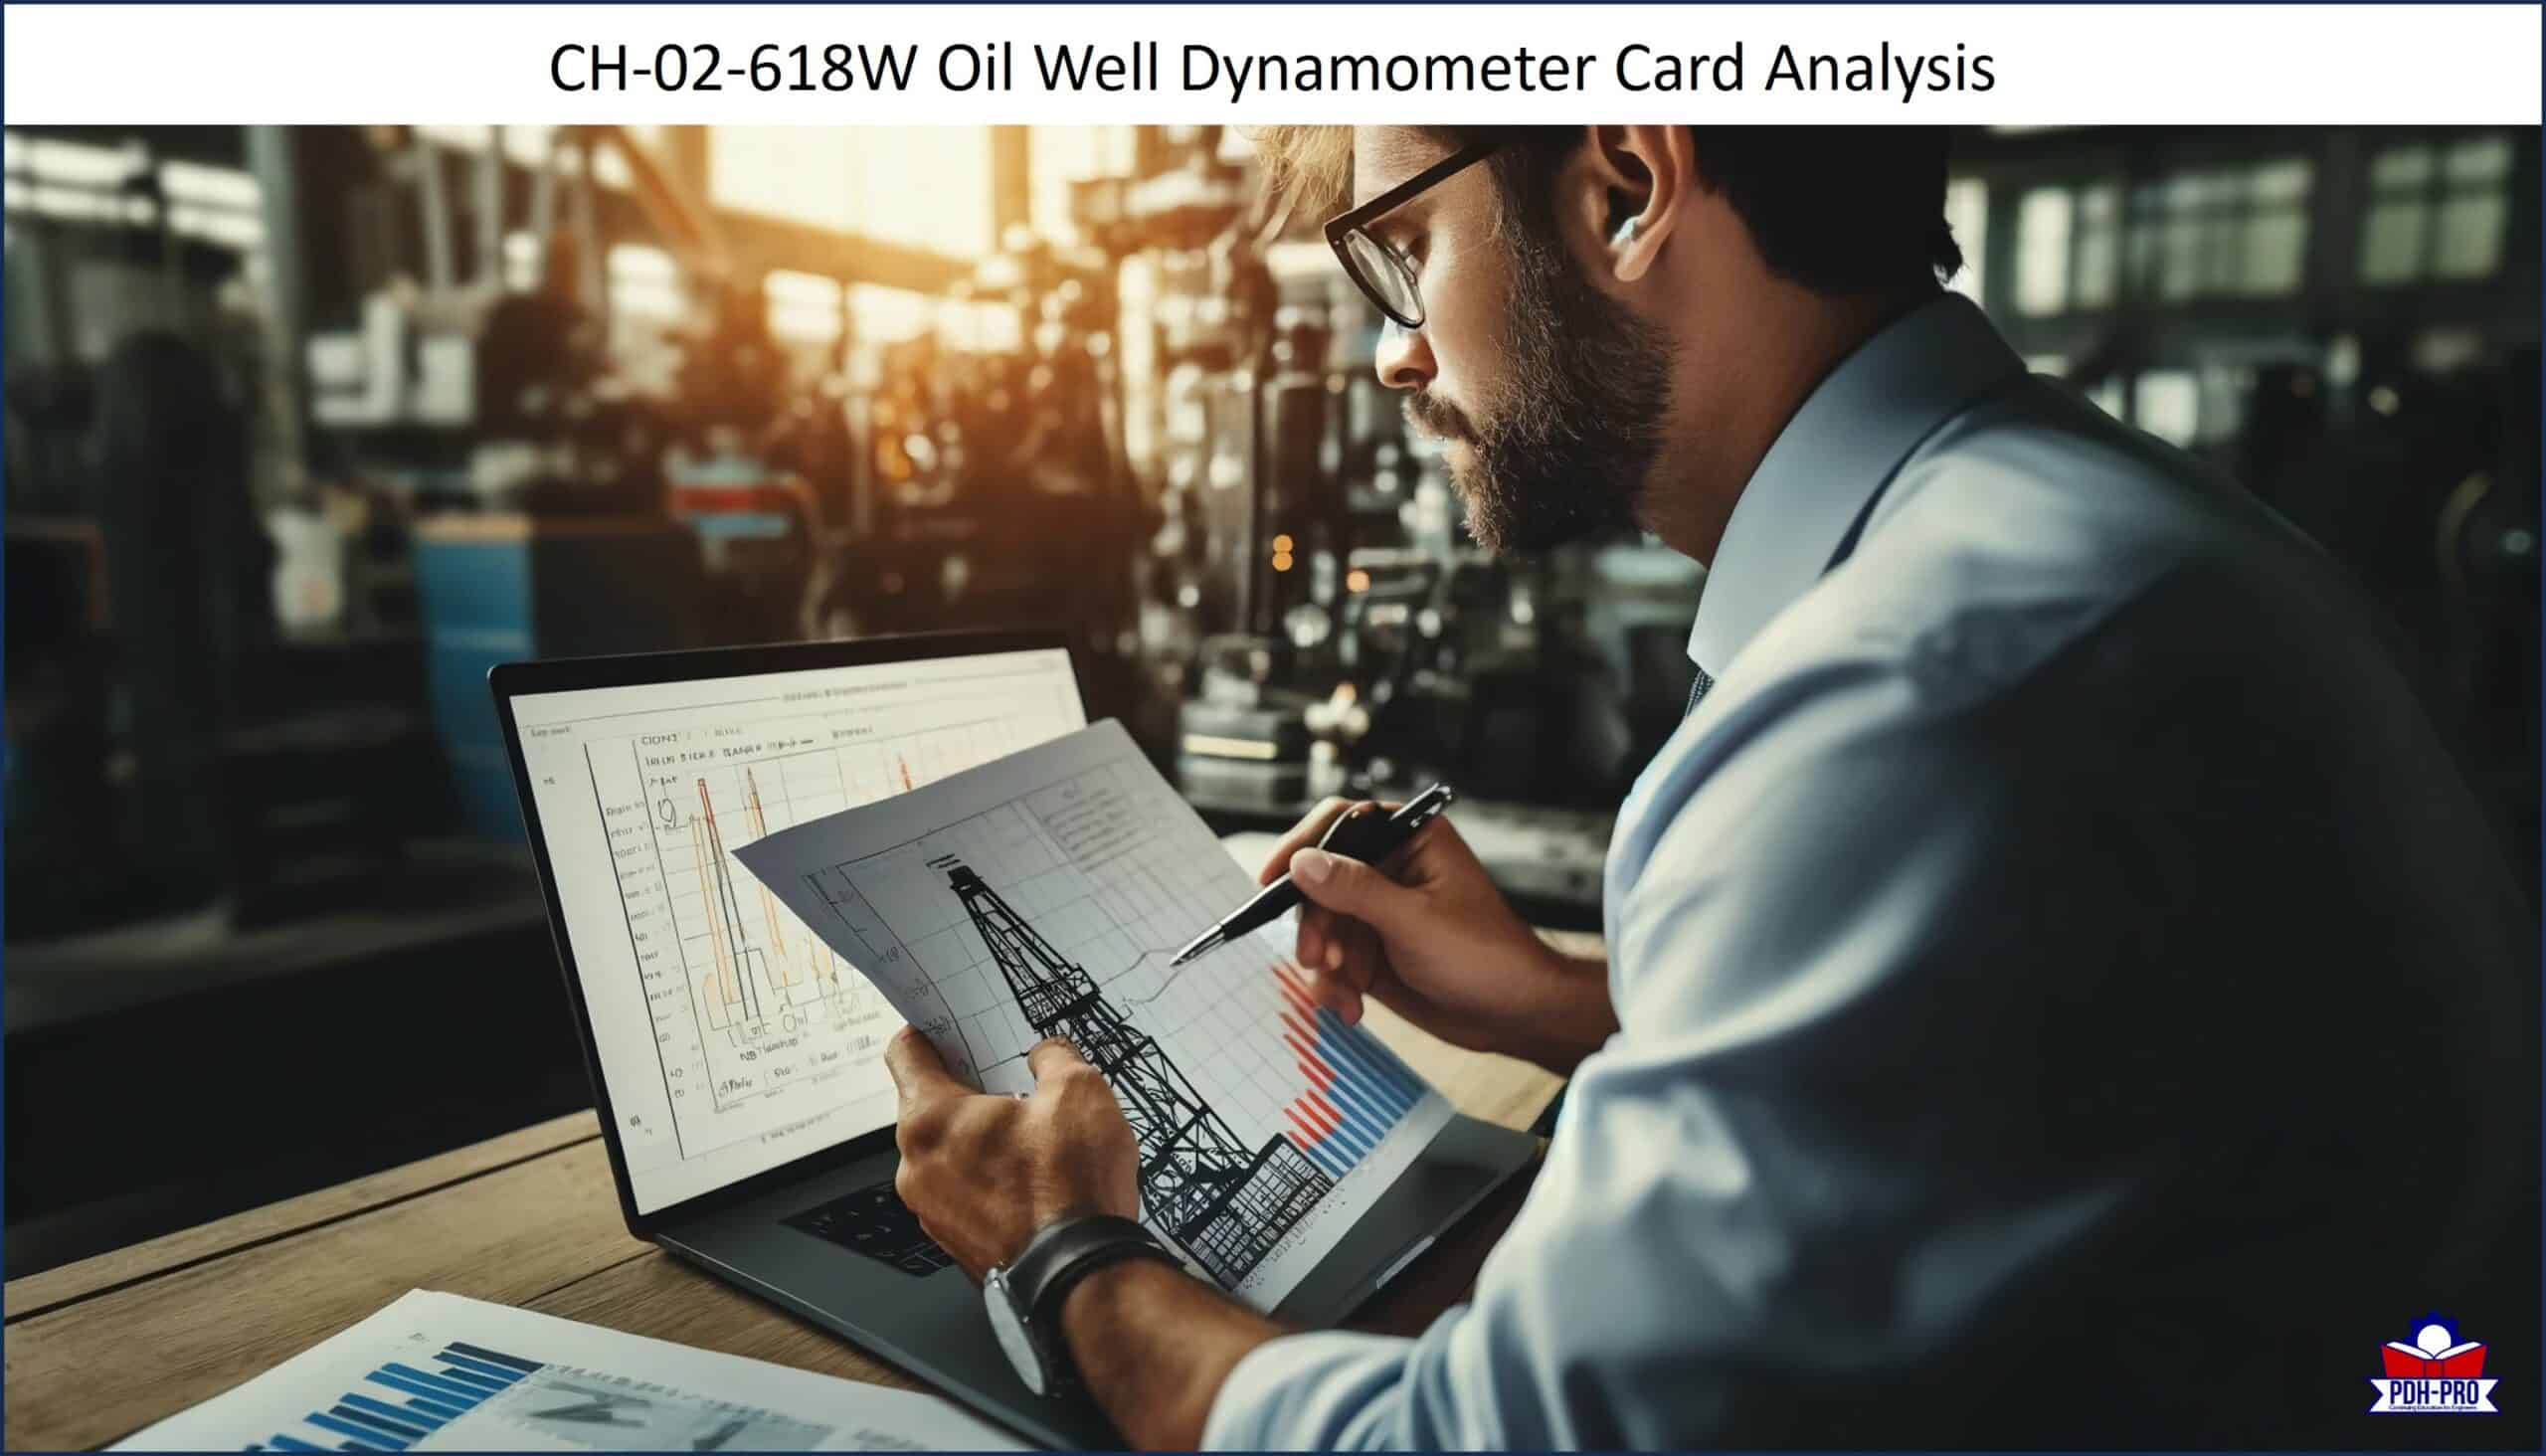 Oil Well Dynamometer Card Analysis